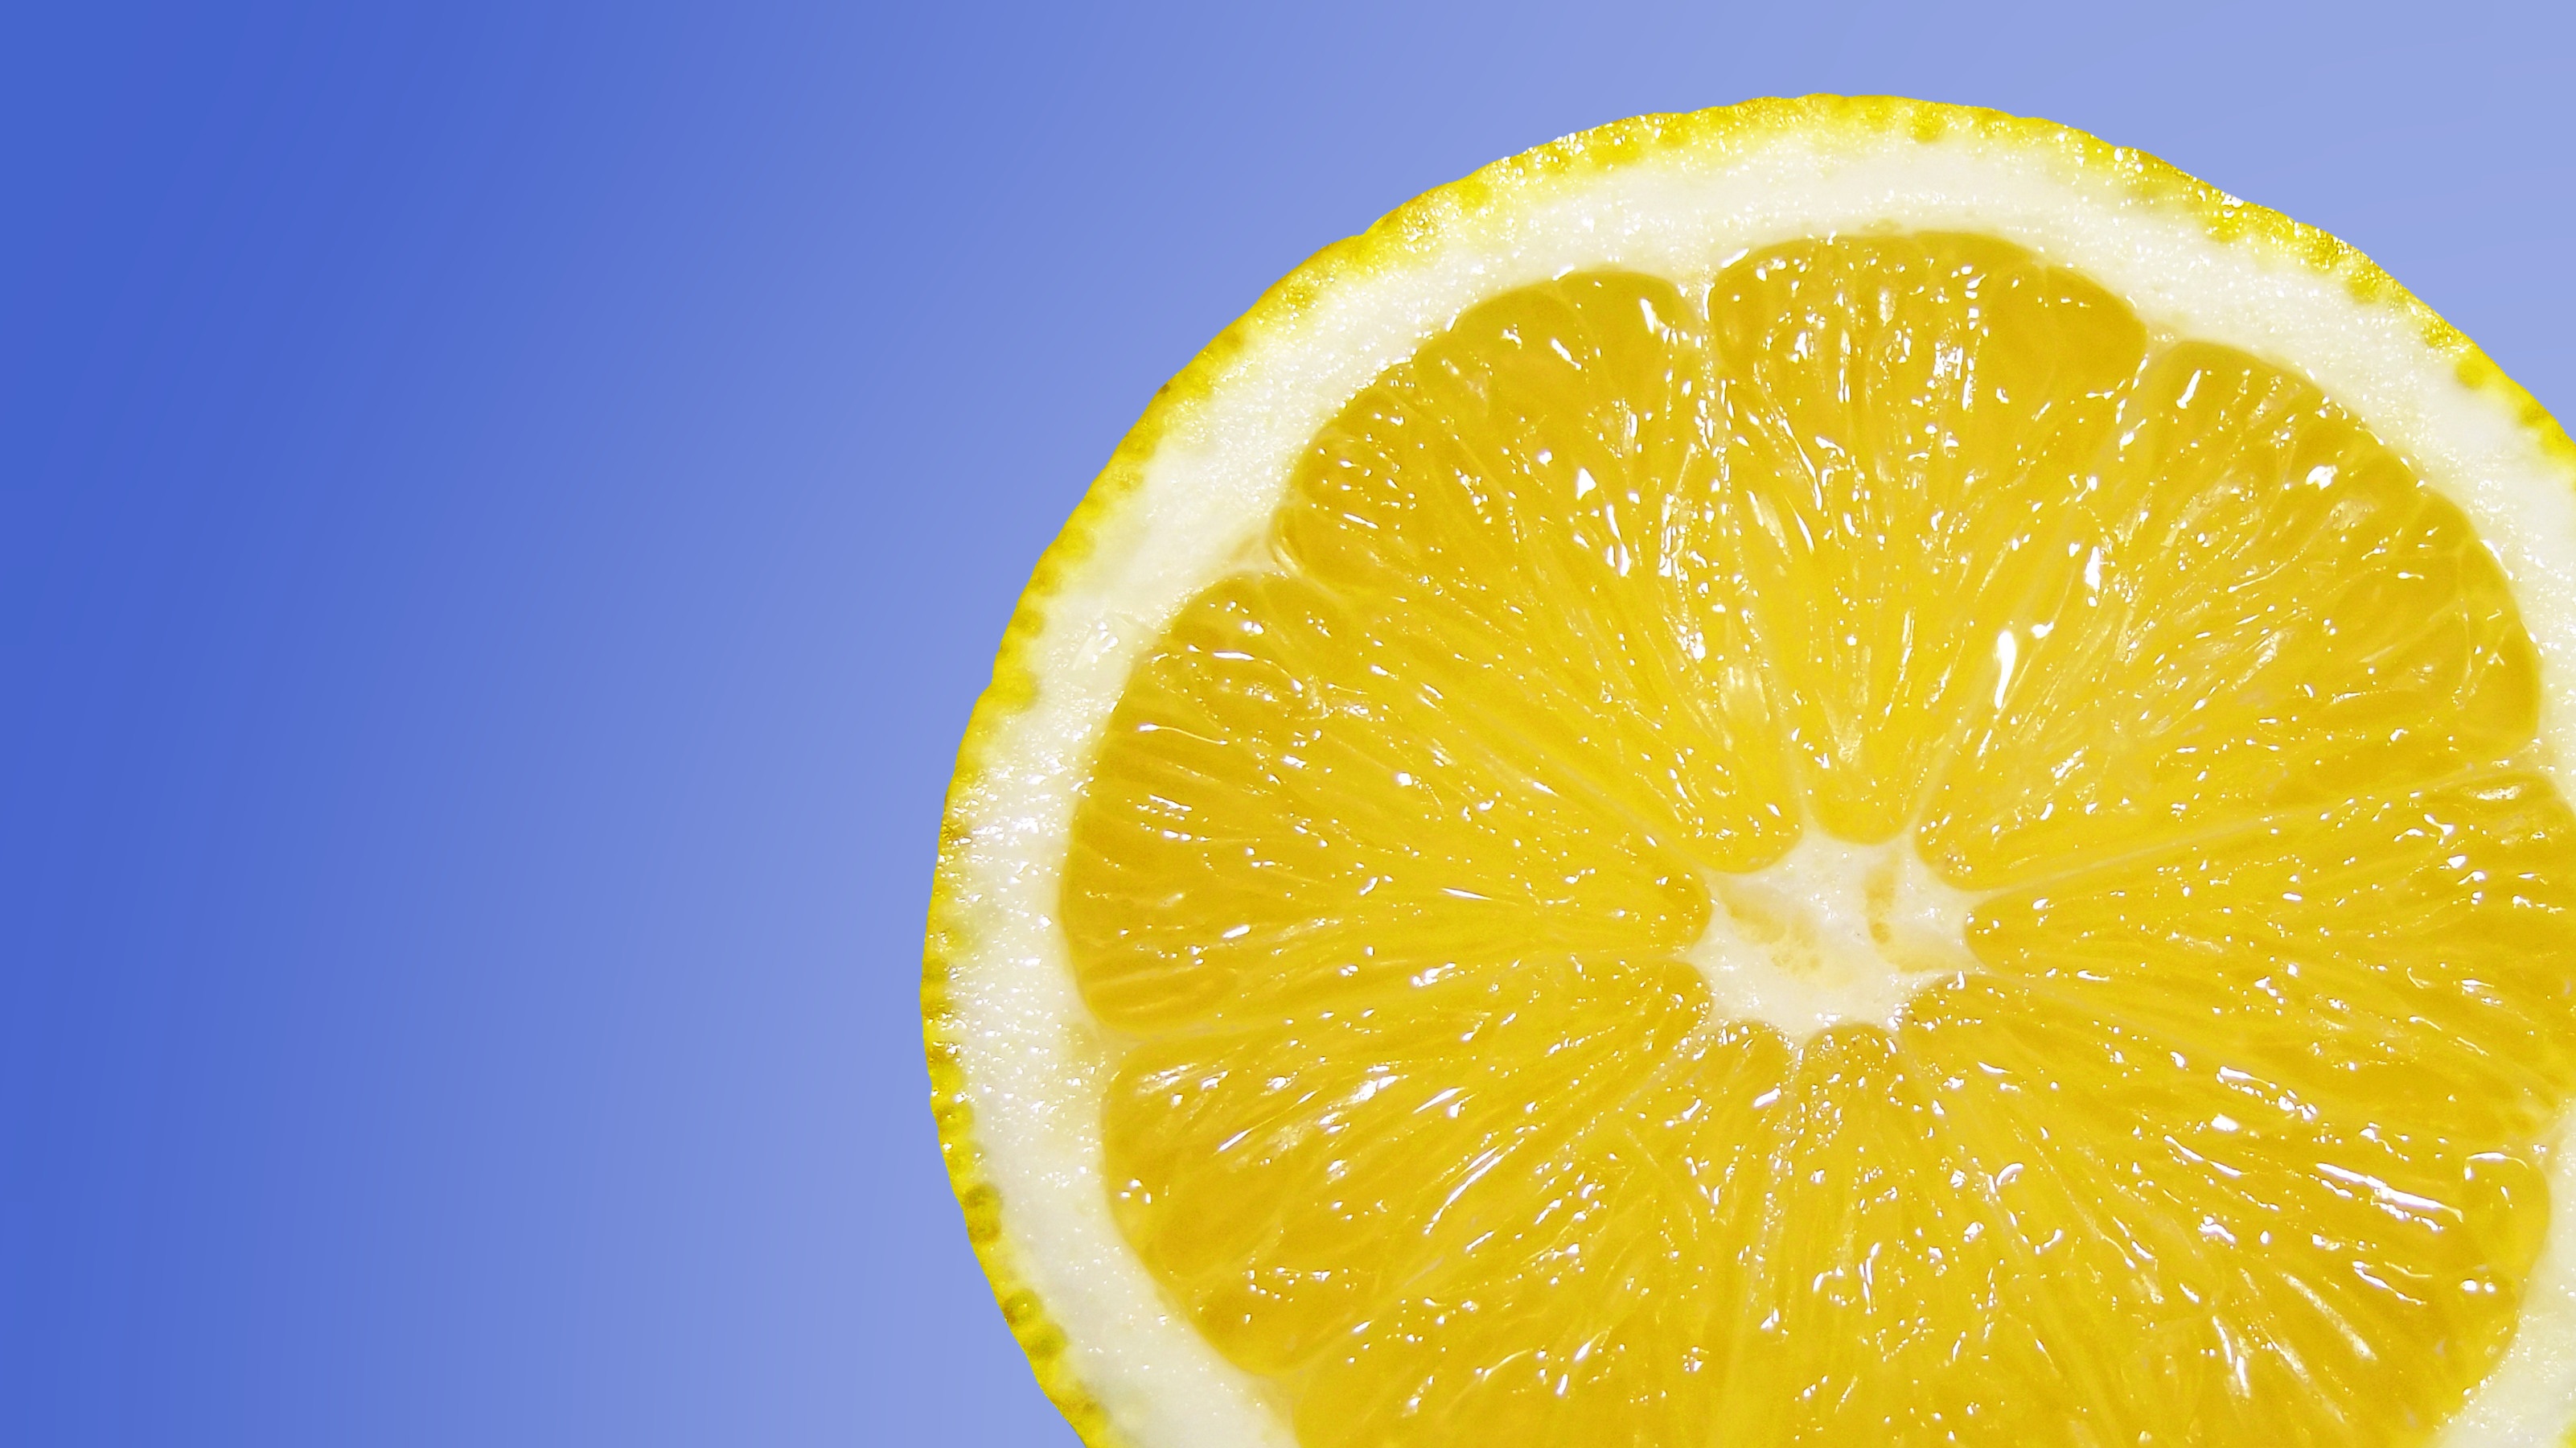 132640 download wallpaper minimalism, lemon, citrus, ripe, slice, section screensavers and pictures for free